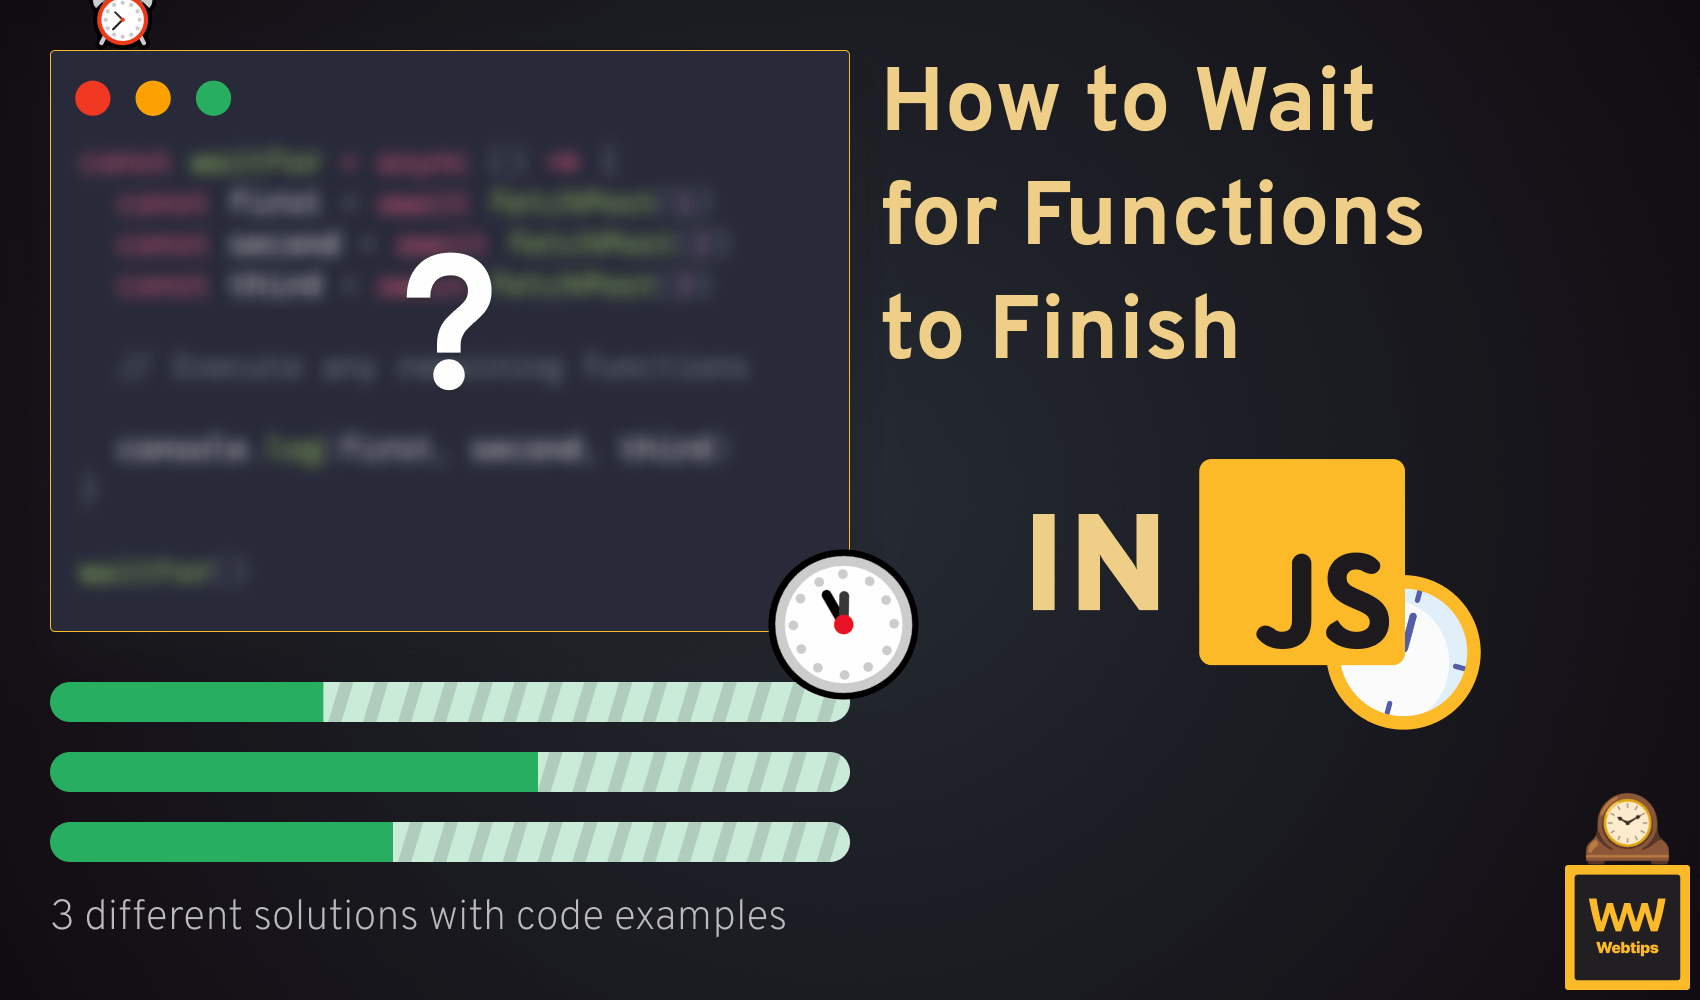 How to Wait for a Function to Finish in JavaScript